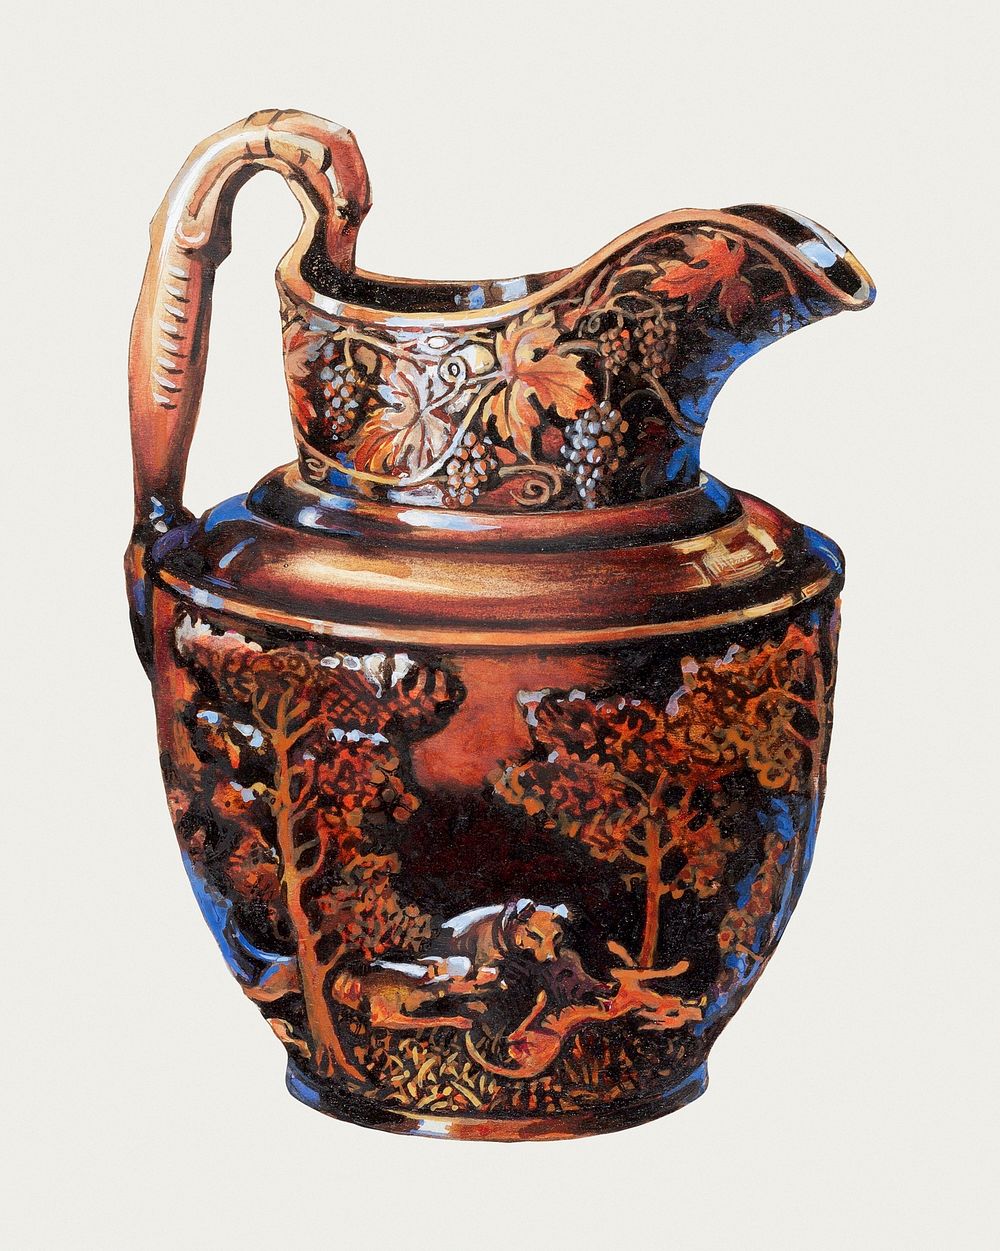 Vintage pitcher illustration, remixed from the artwork by Charles Caseau